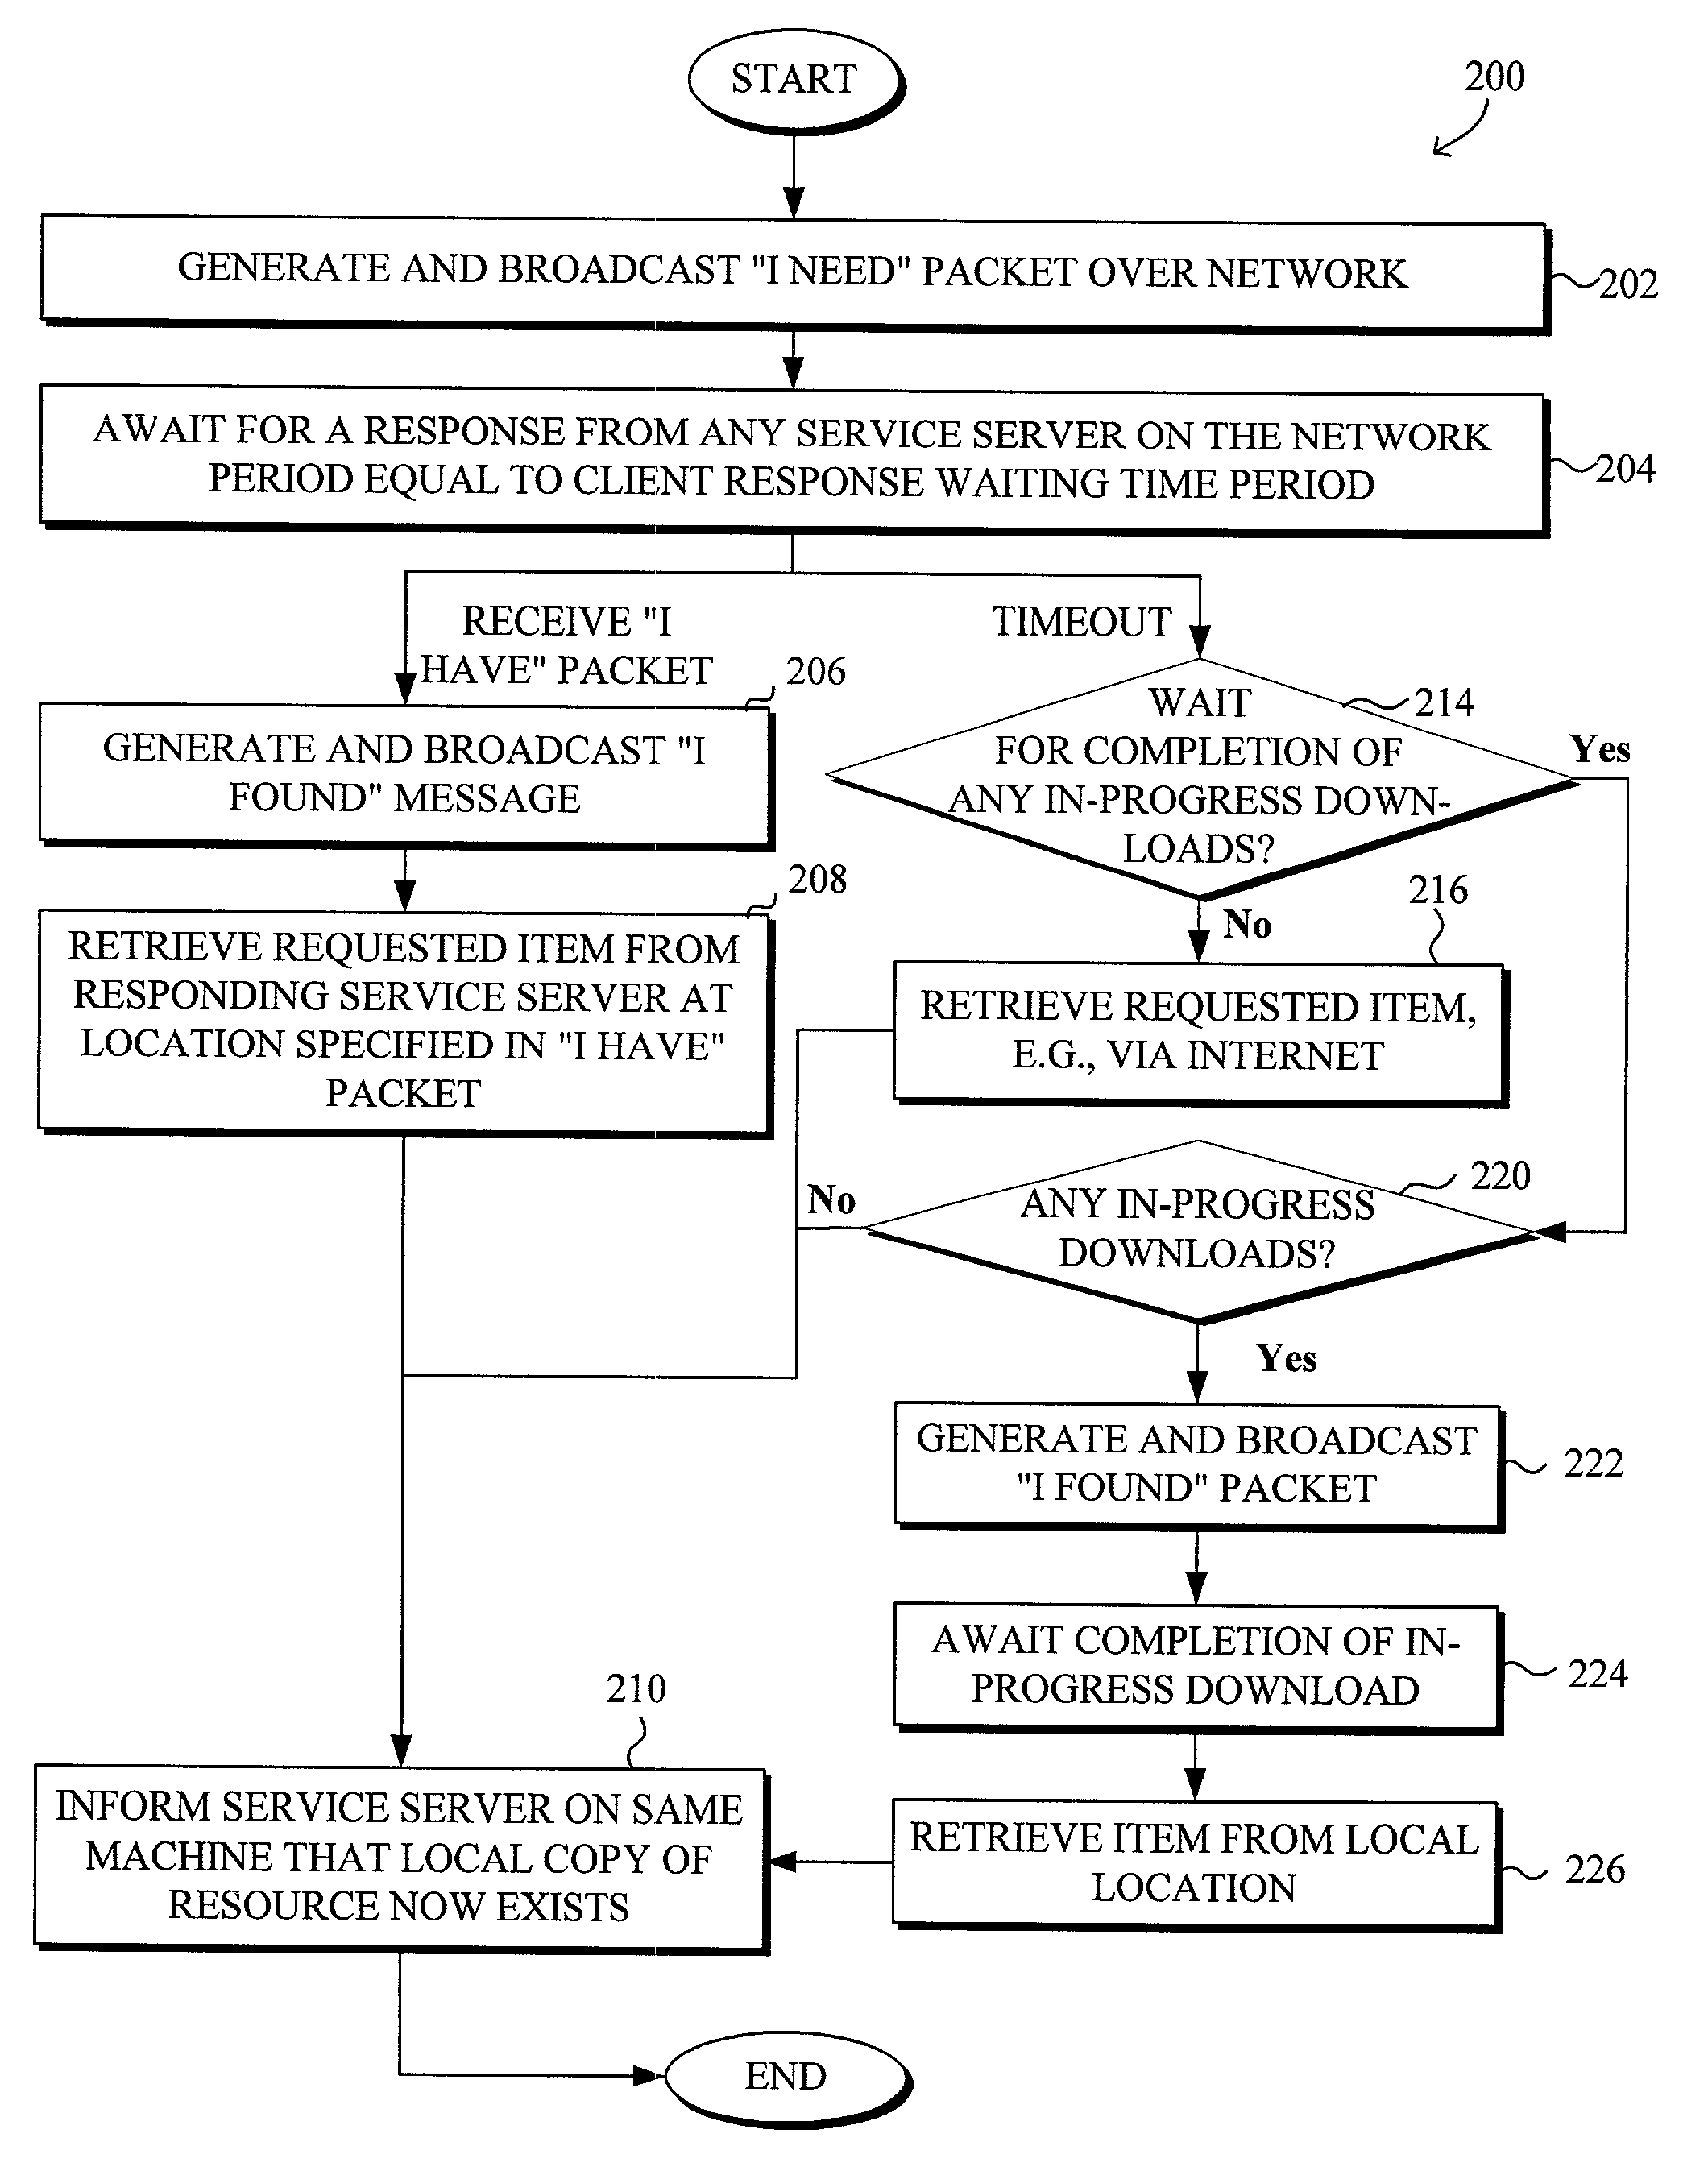 System and method for secure and verified sharing of resources in a peer-to-peer network environment